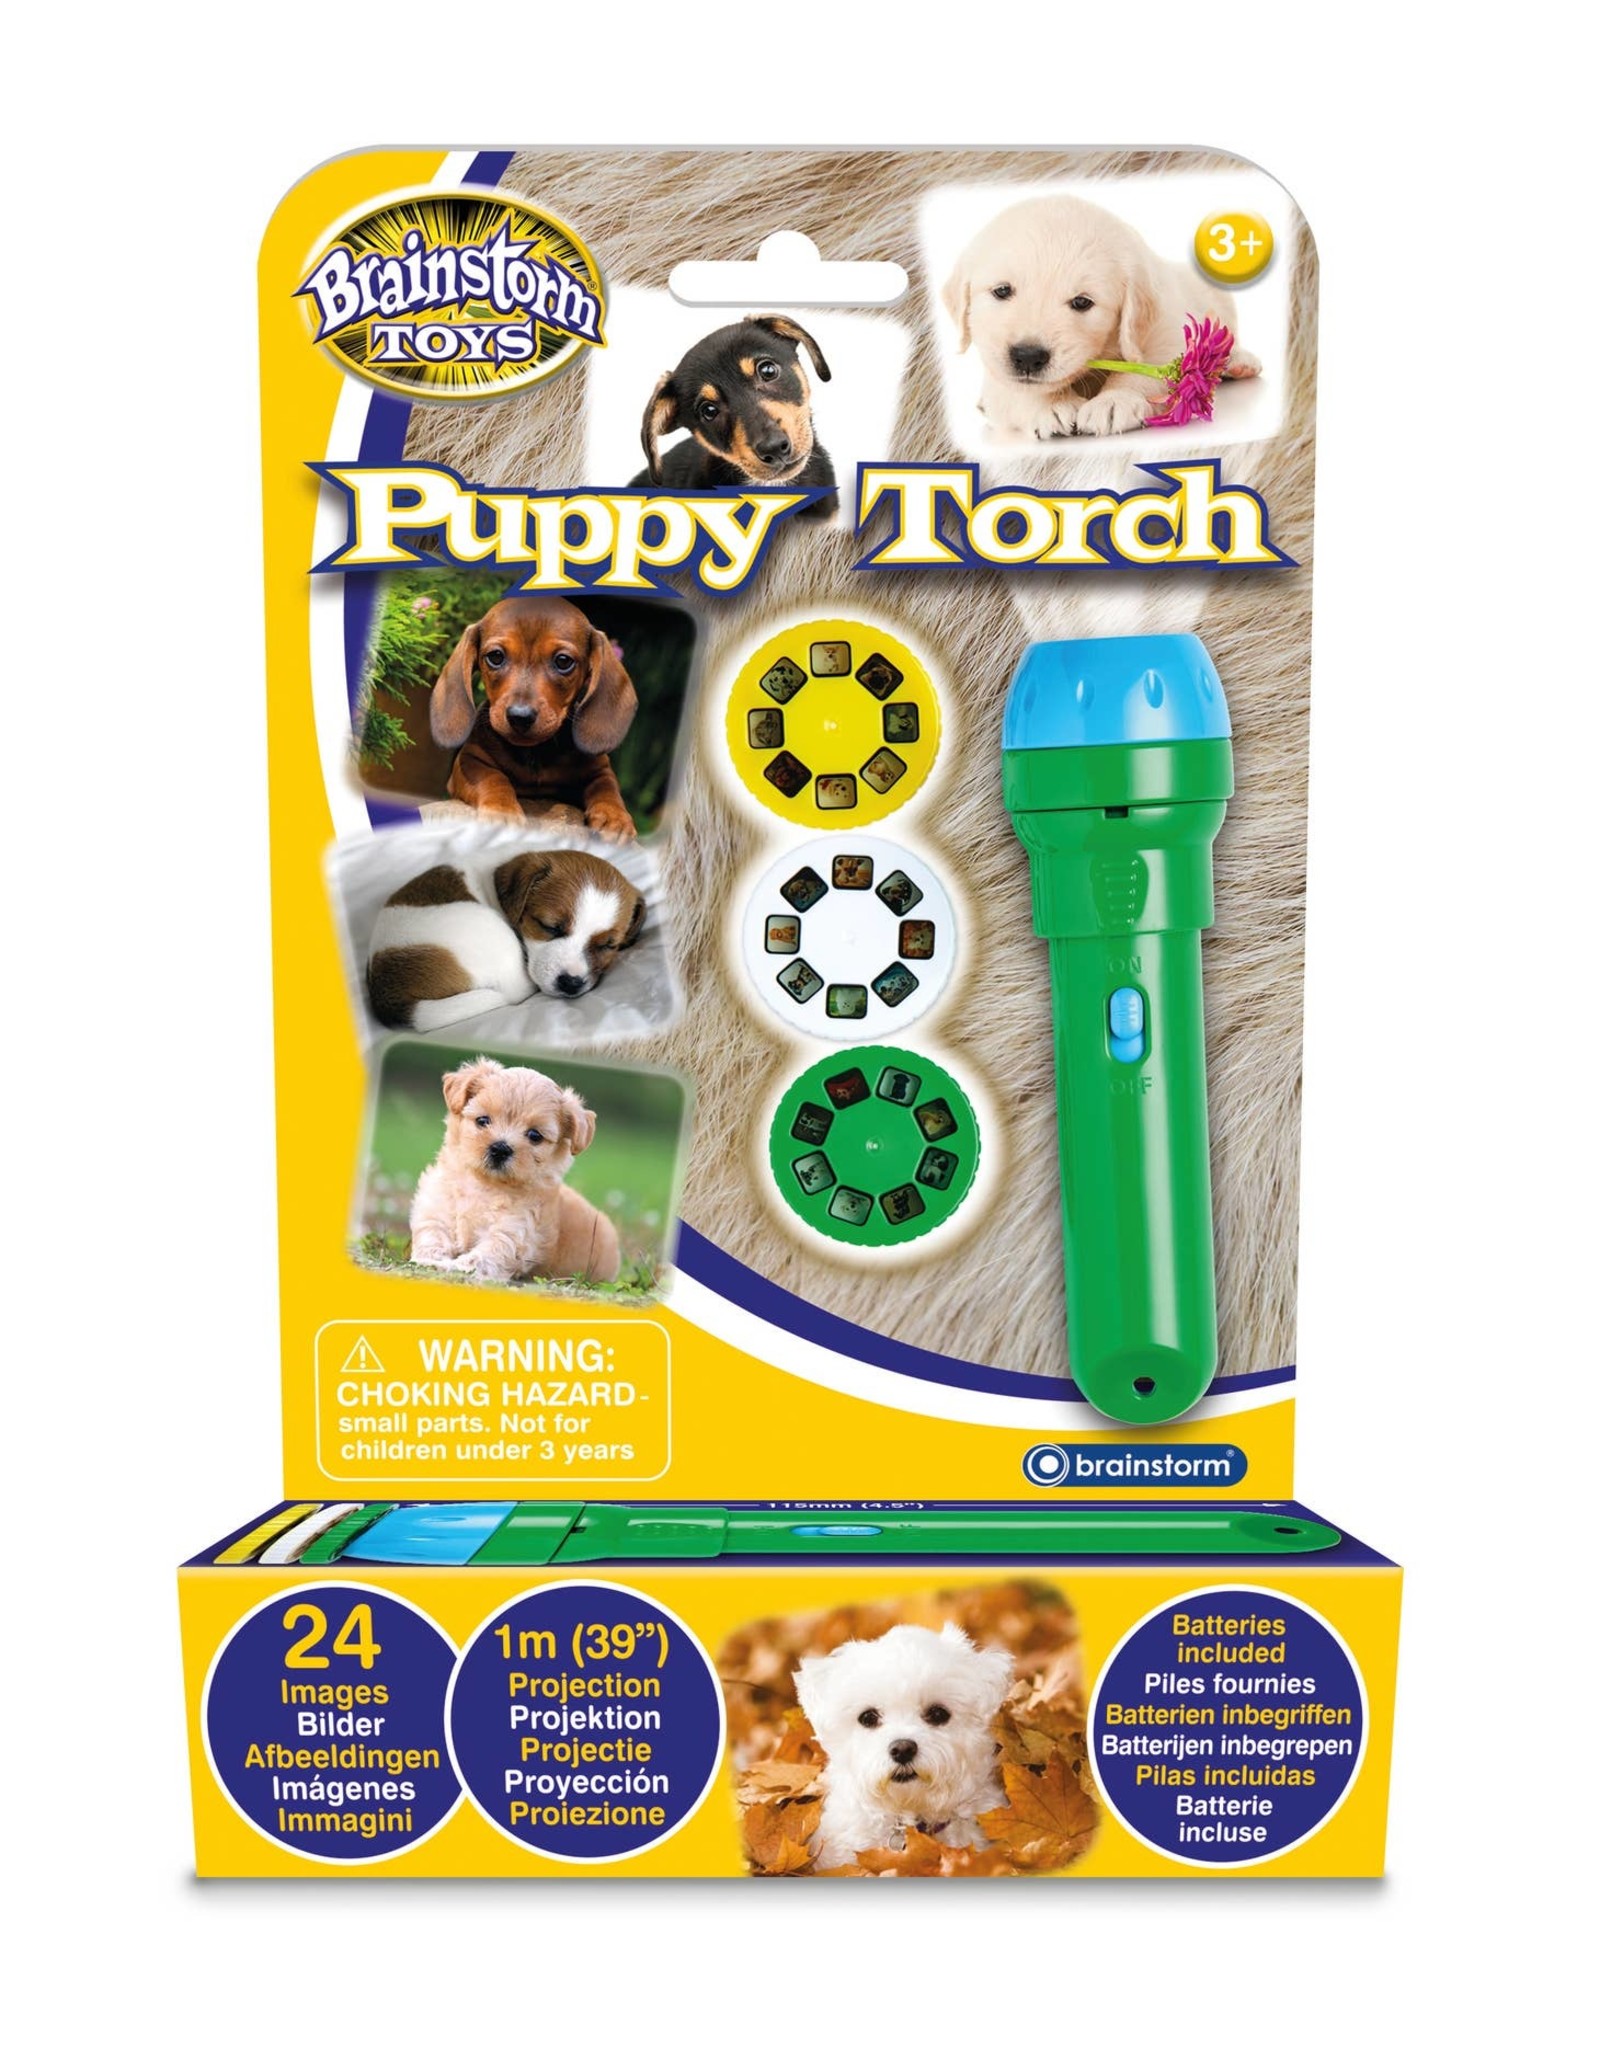 Hauck Toys E2073 Puppy Torch & Projector